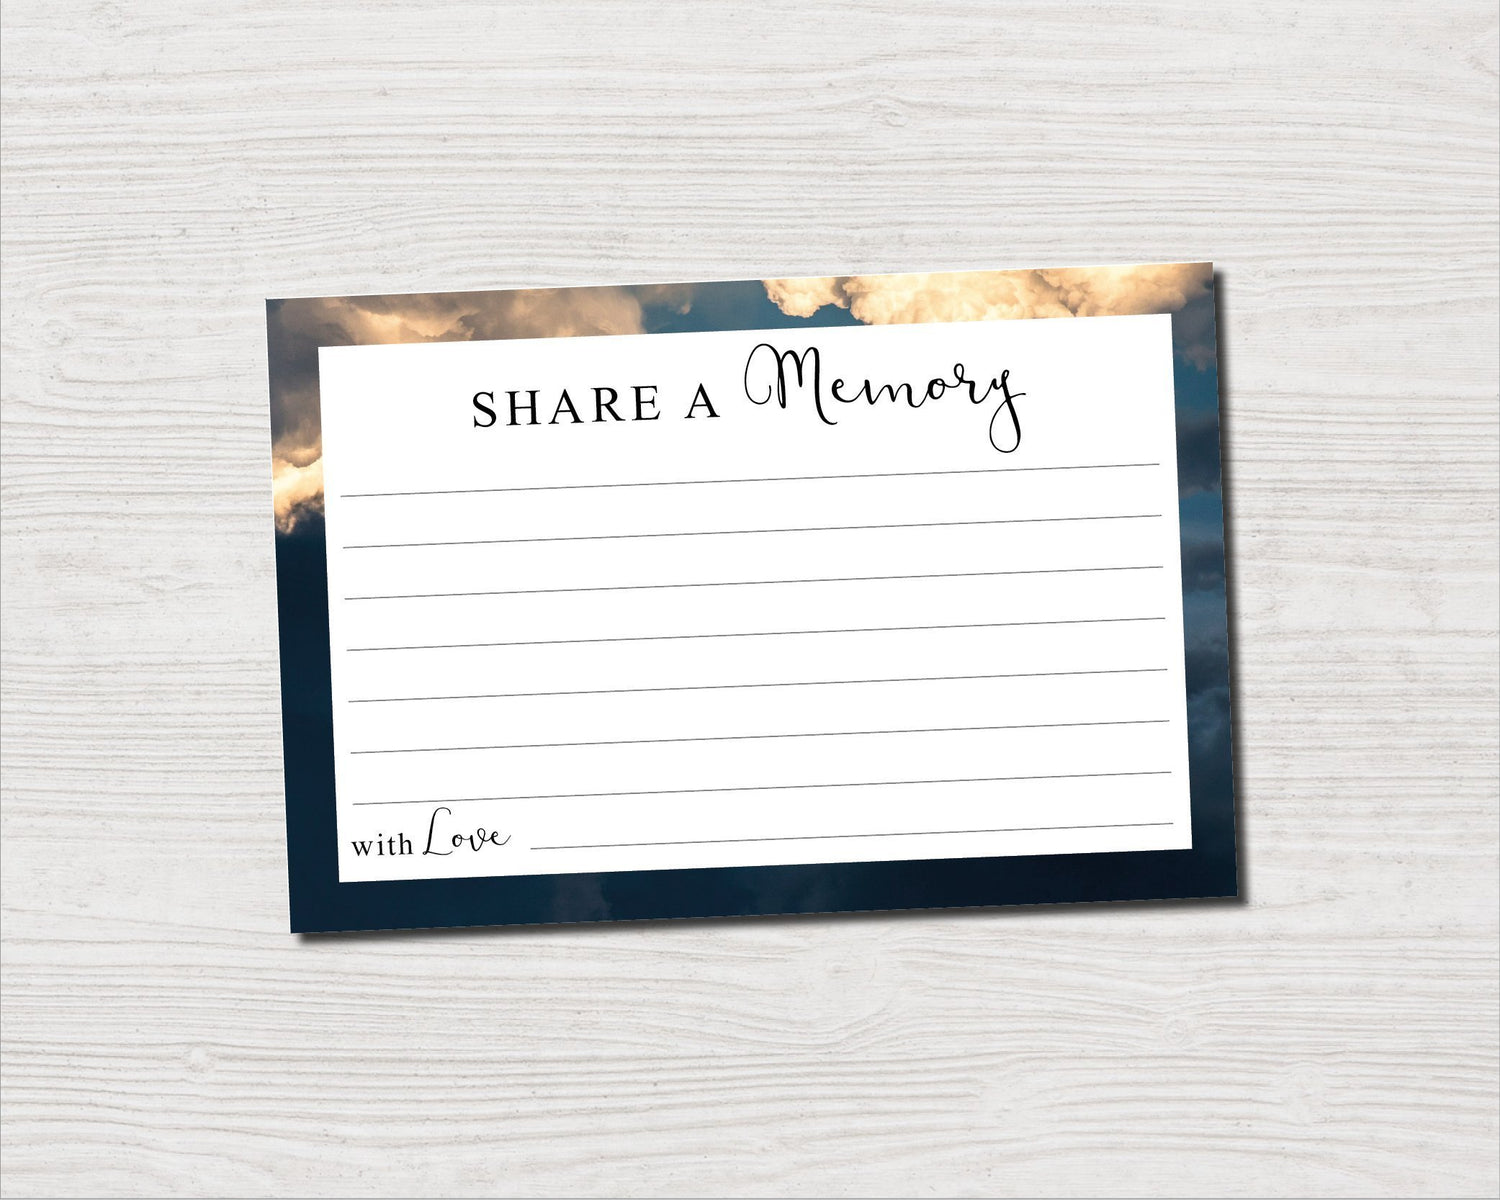 Sky Share a Memory Sign and Cards